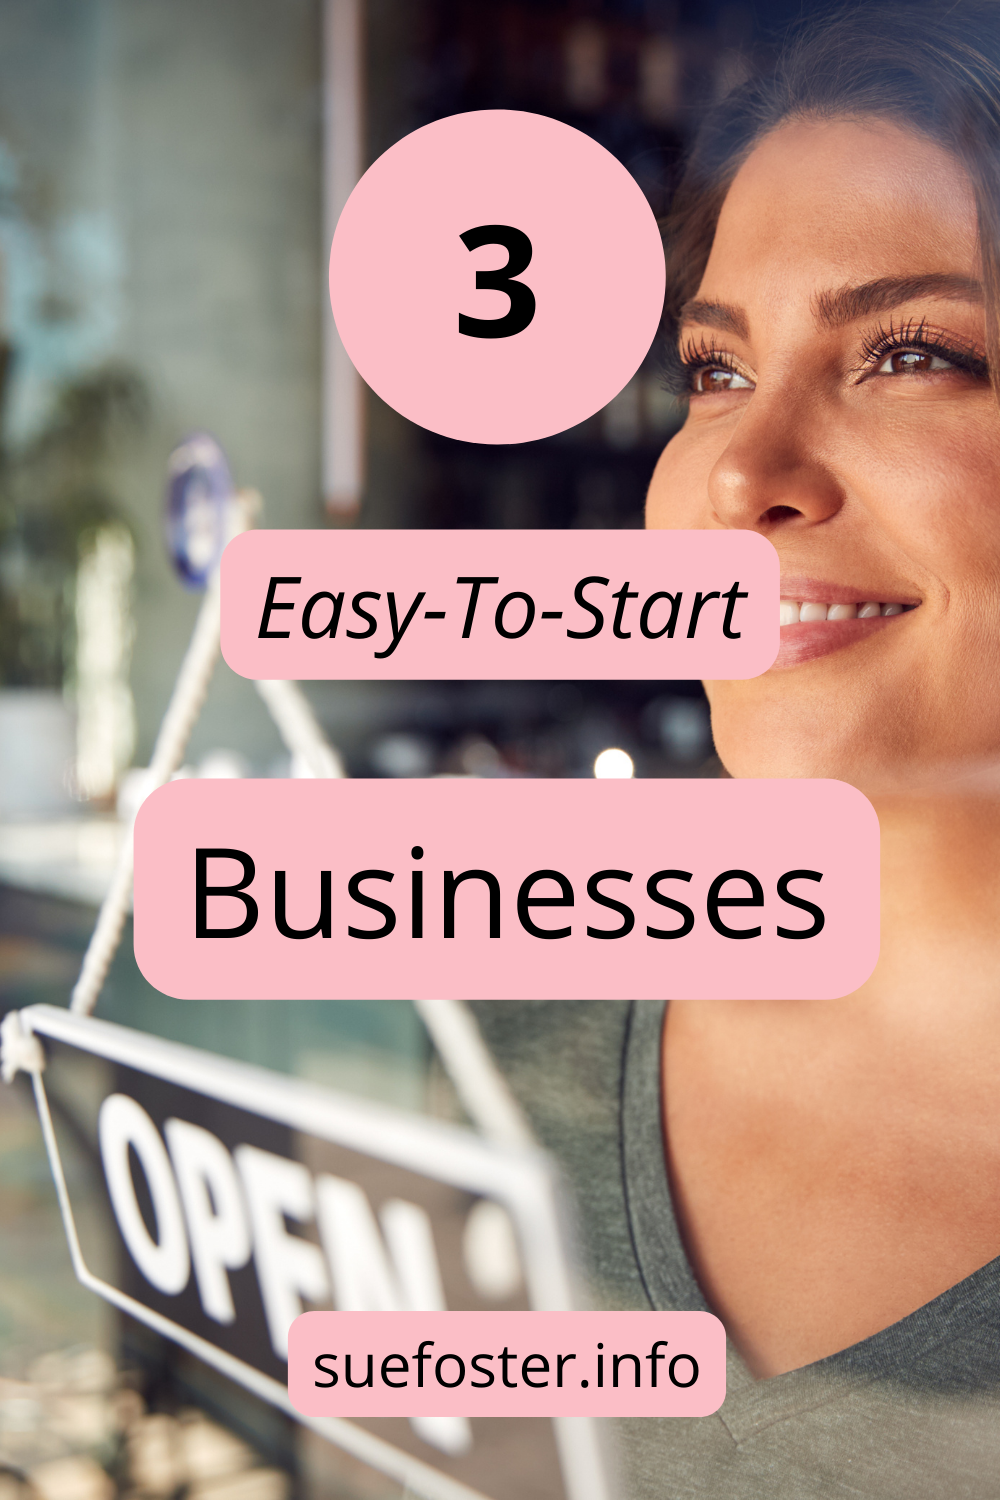 If you’re a first-time entrepreneur, then these 3 easy-to-start businesses could be attractive to you.